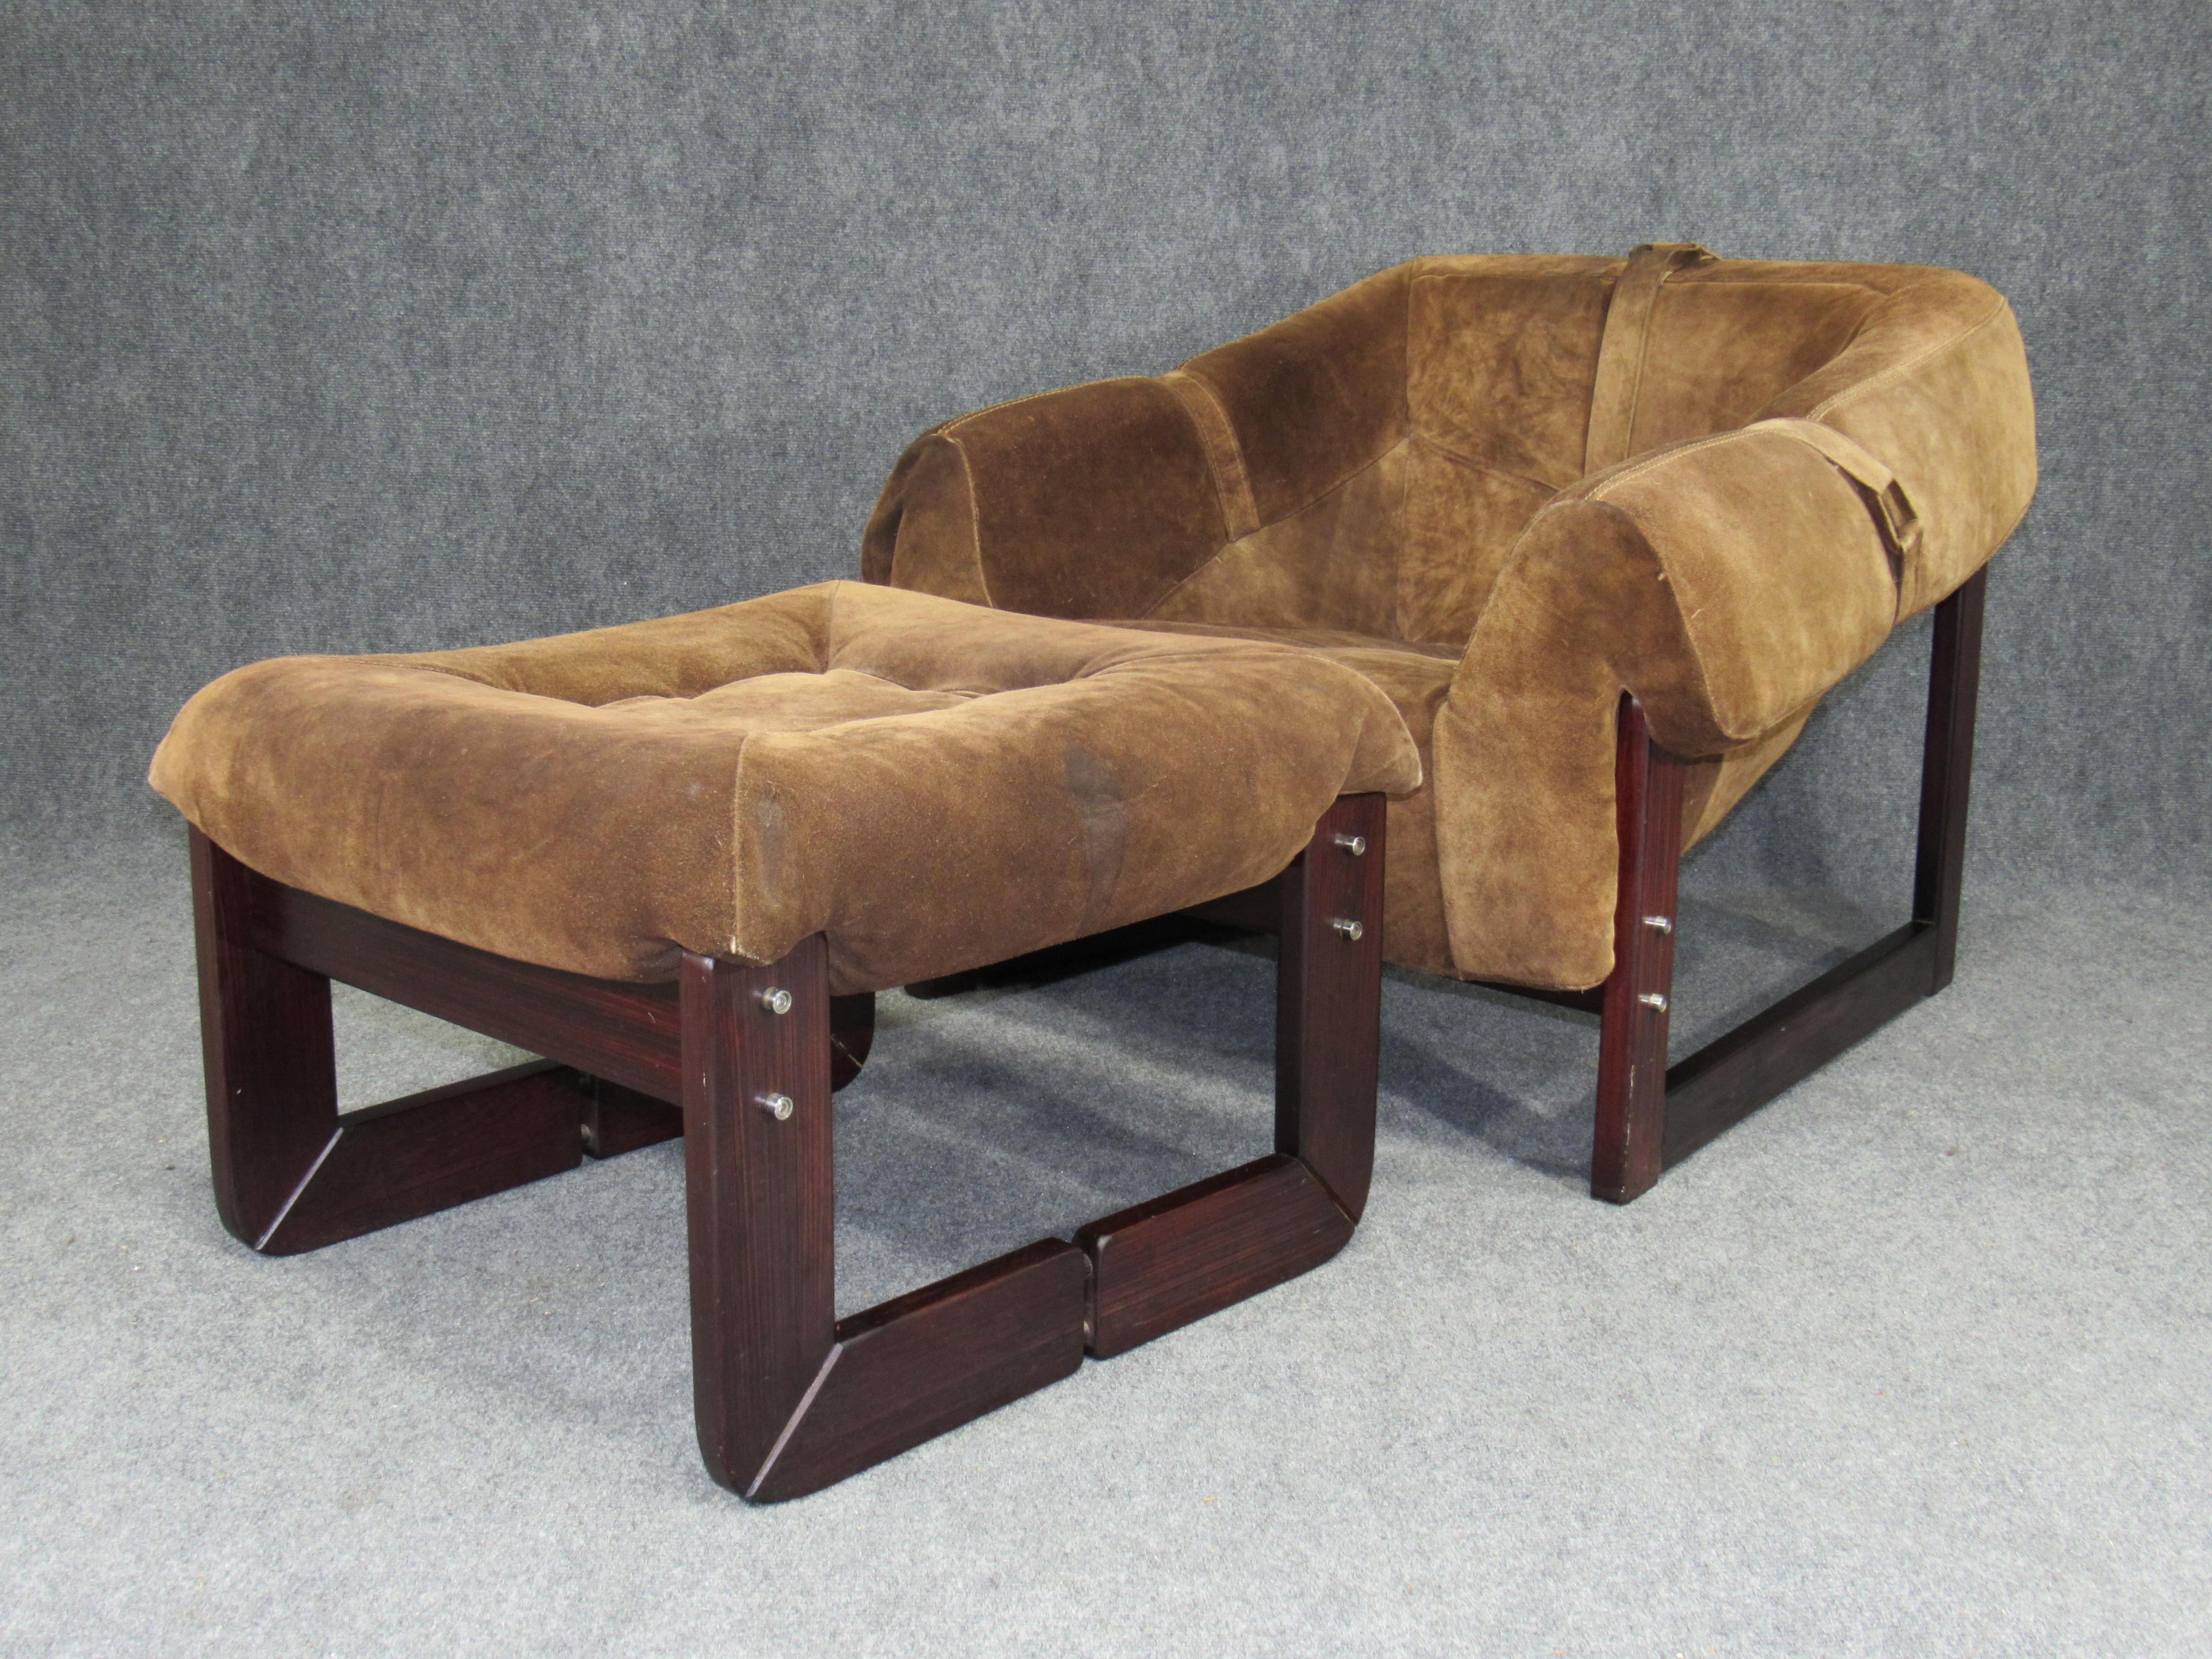 Suede Brazilian Mid-Century Modern Armchair and Ottoman by Percival Lafer in Chocolate